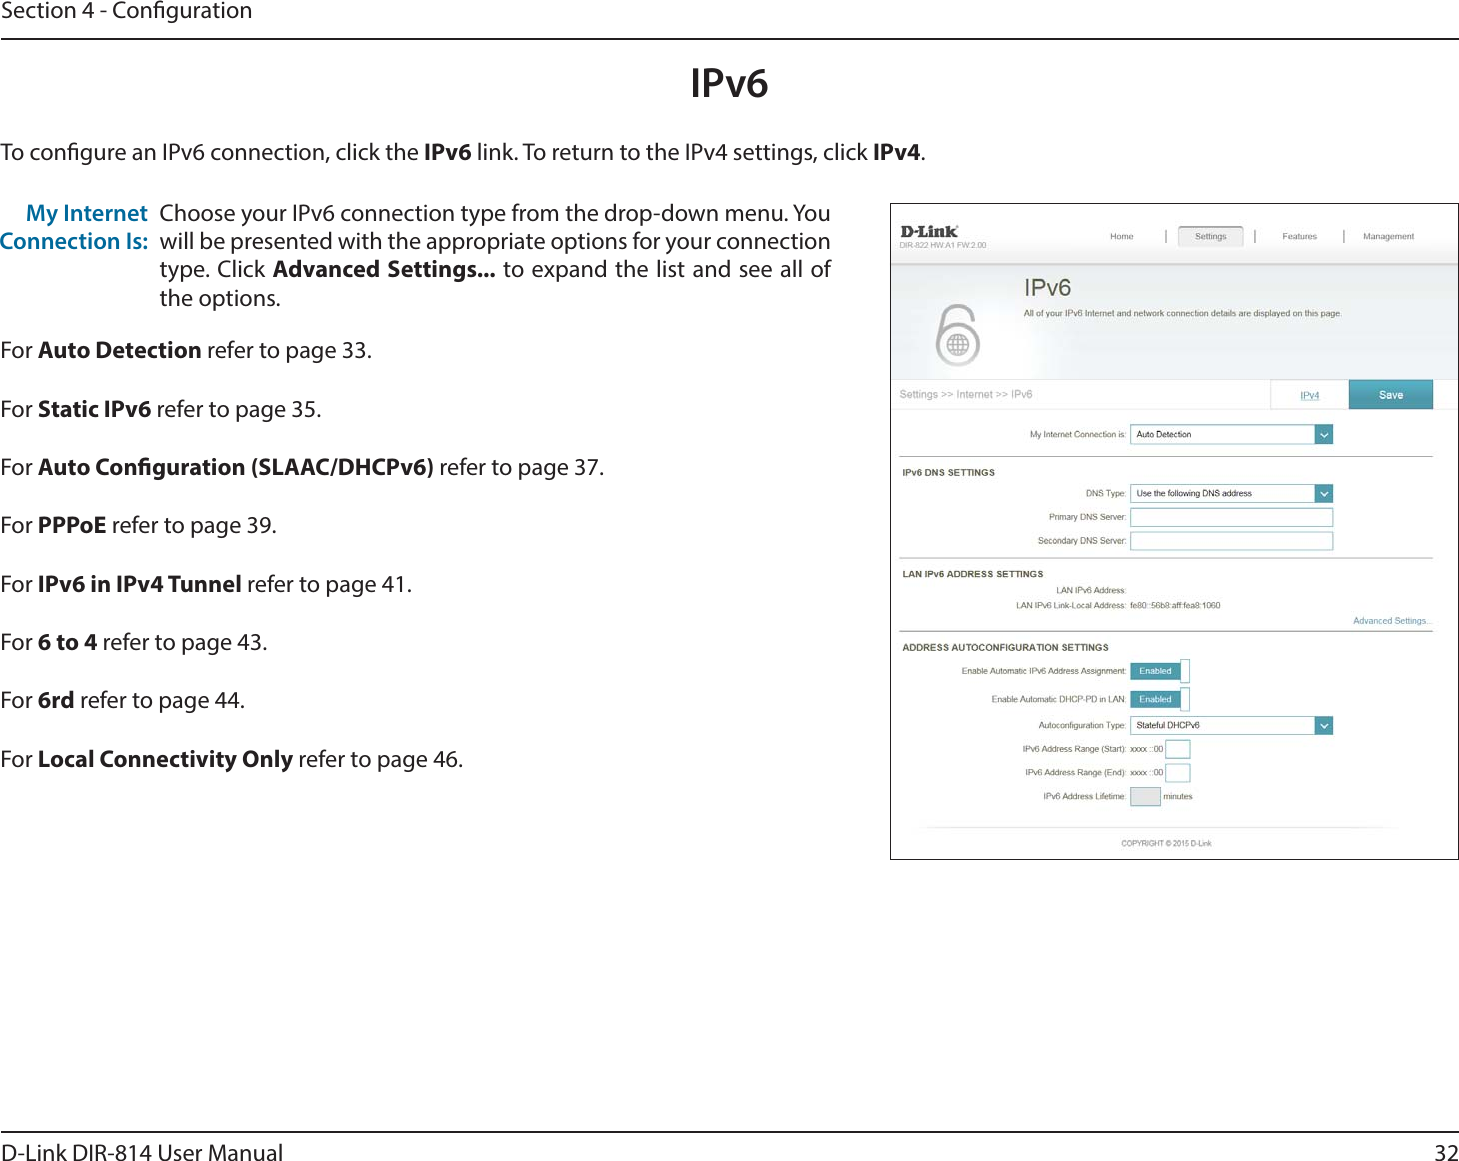 32D-Link DIR-814 User ManualSection 4 - CongurationIPv6To congure an IPv6 connection, click the IPv6 link. To return to the IPv4 settings, click IPv4.Choose your IPv6 connection type from the drop-down menu. You will be presented with the appropriate options for your connection type. Click Advanced Settings... to expand the list and see all of the options.My Internet Connection Is:For Auto Detection refer to page 33.For Static IPv6 refer to page 35.For Auto Conguration (SLAAC/DHCPv6) refer to page 37.For PPPoE refer to page 39.For IPv6 in IPv4 Tunnel refer to page 41.For 6 to 4 refer to page 43.For 6rd refer to page 44.For Local Connectivity Only refer to page 46.